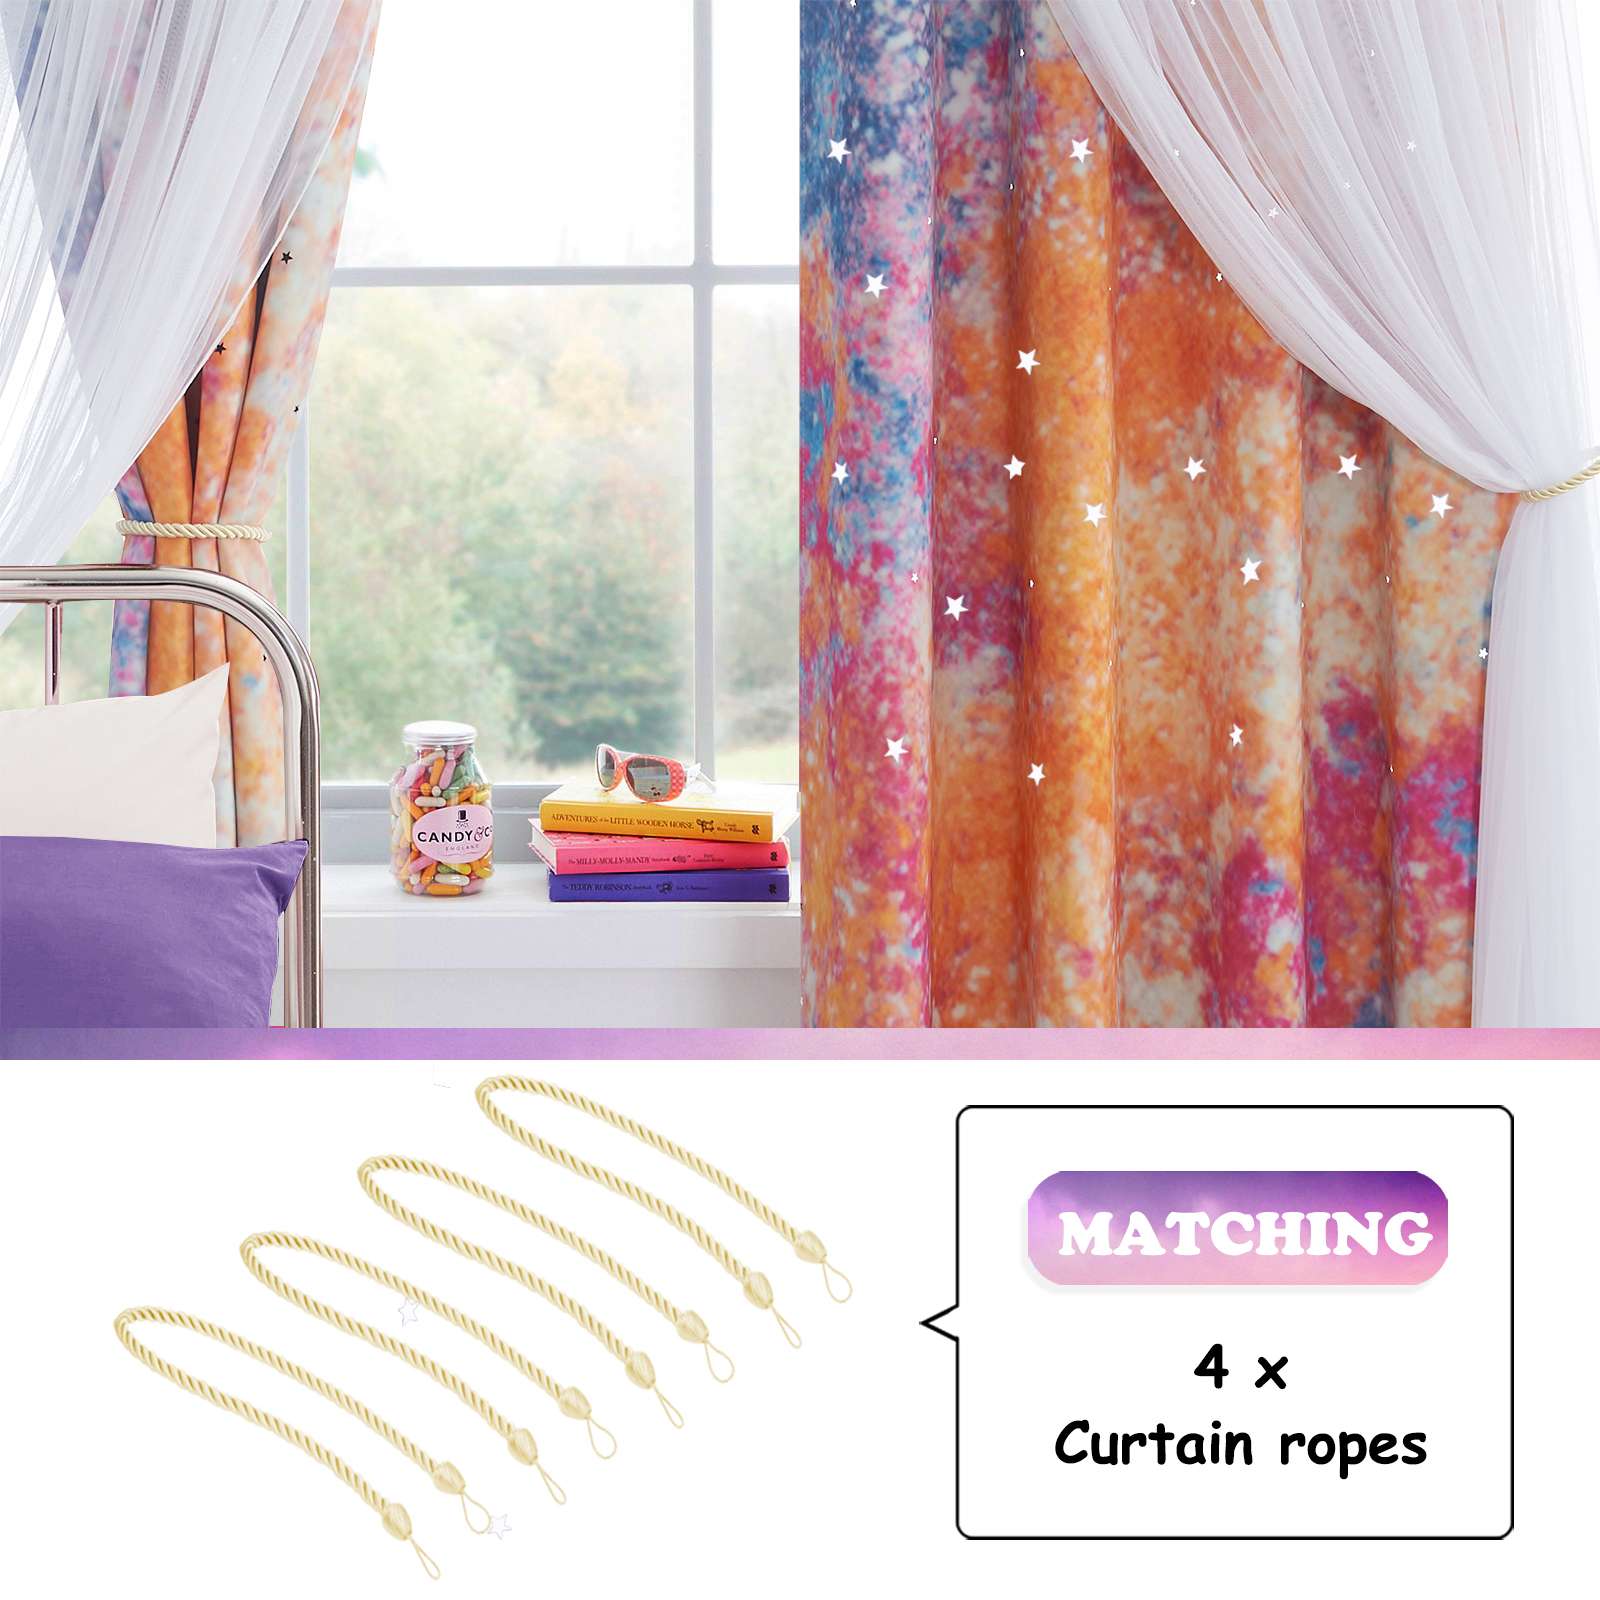 Yellow & Pink Curtains Double Layer with Sheer Star Cut Out Blackout Curtains for Kids Nursery 2 Panels